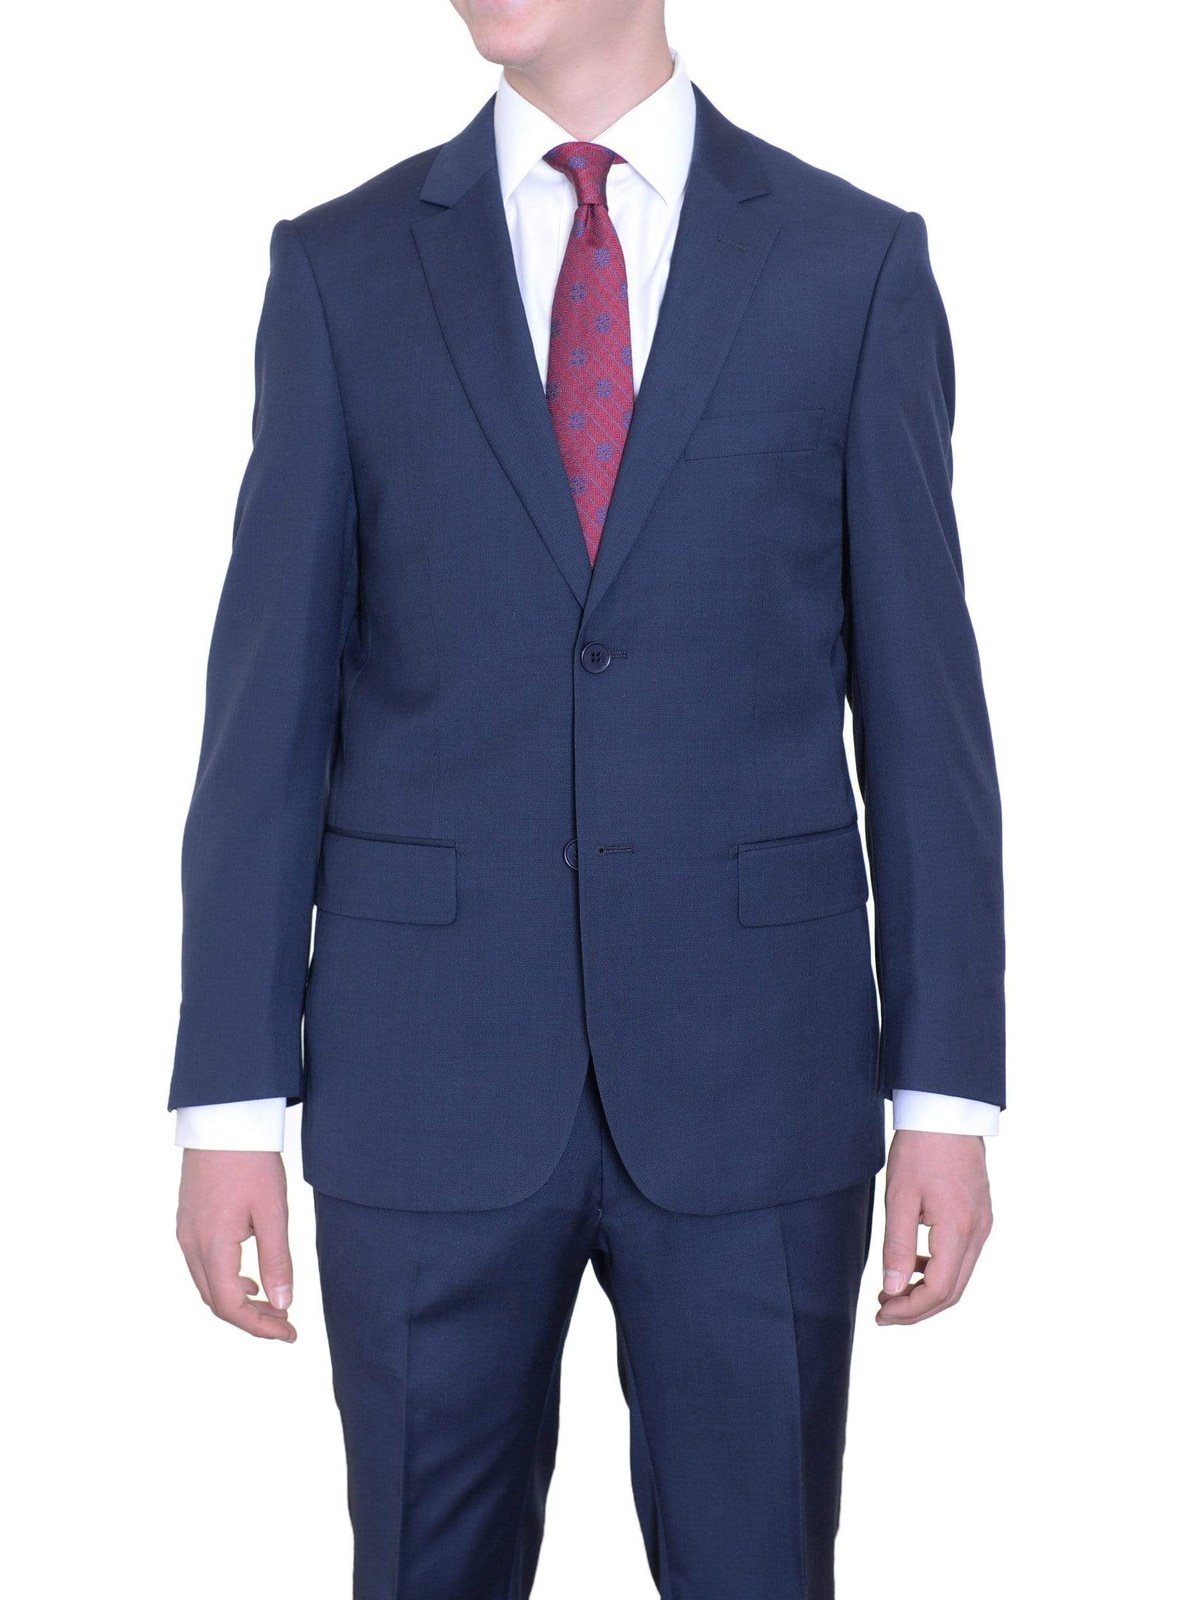 Label M TWO PIECE SUITS 36S Mens Extra Slim Fit Solid Heather Blue Two Button Wool Suit